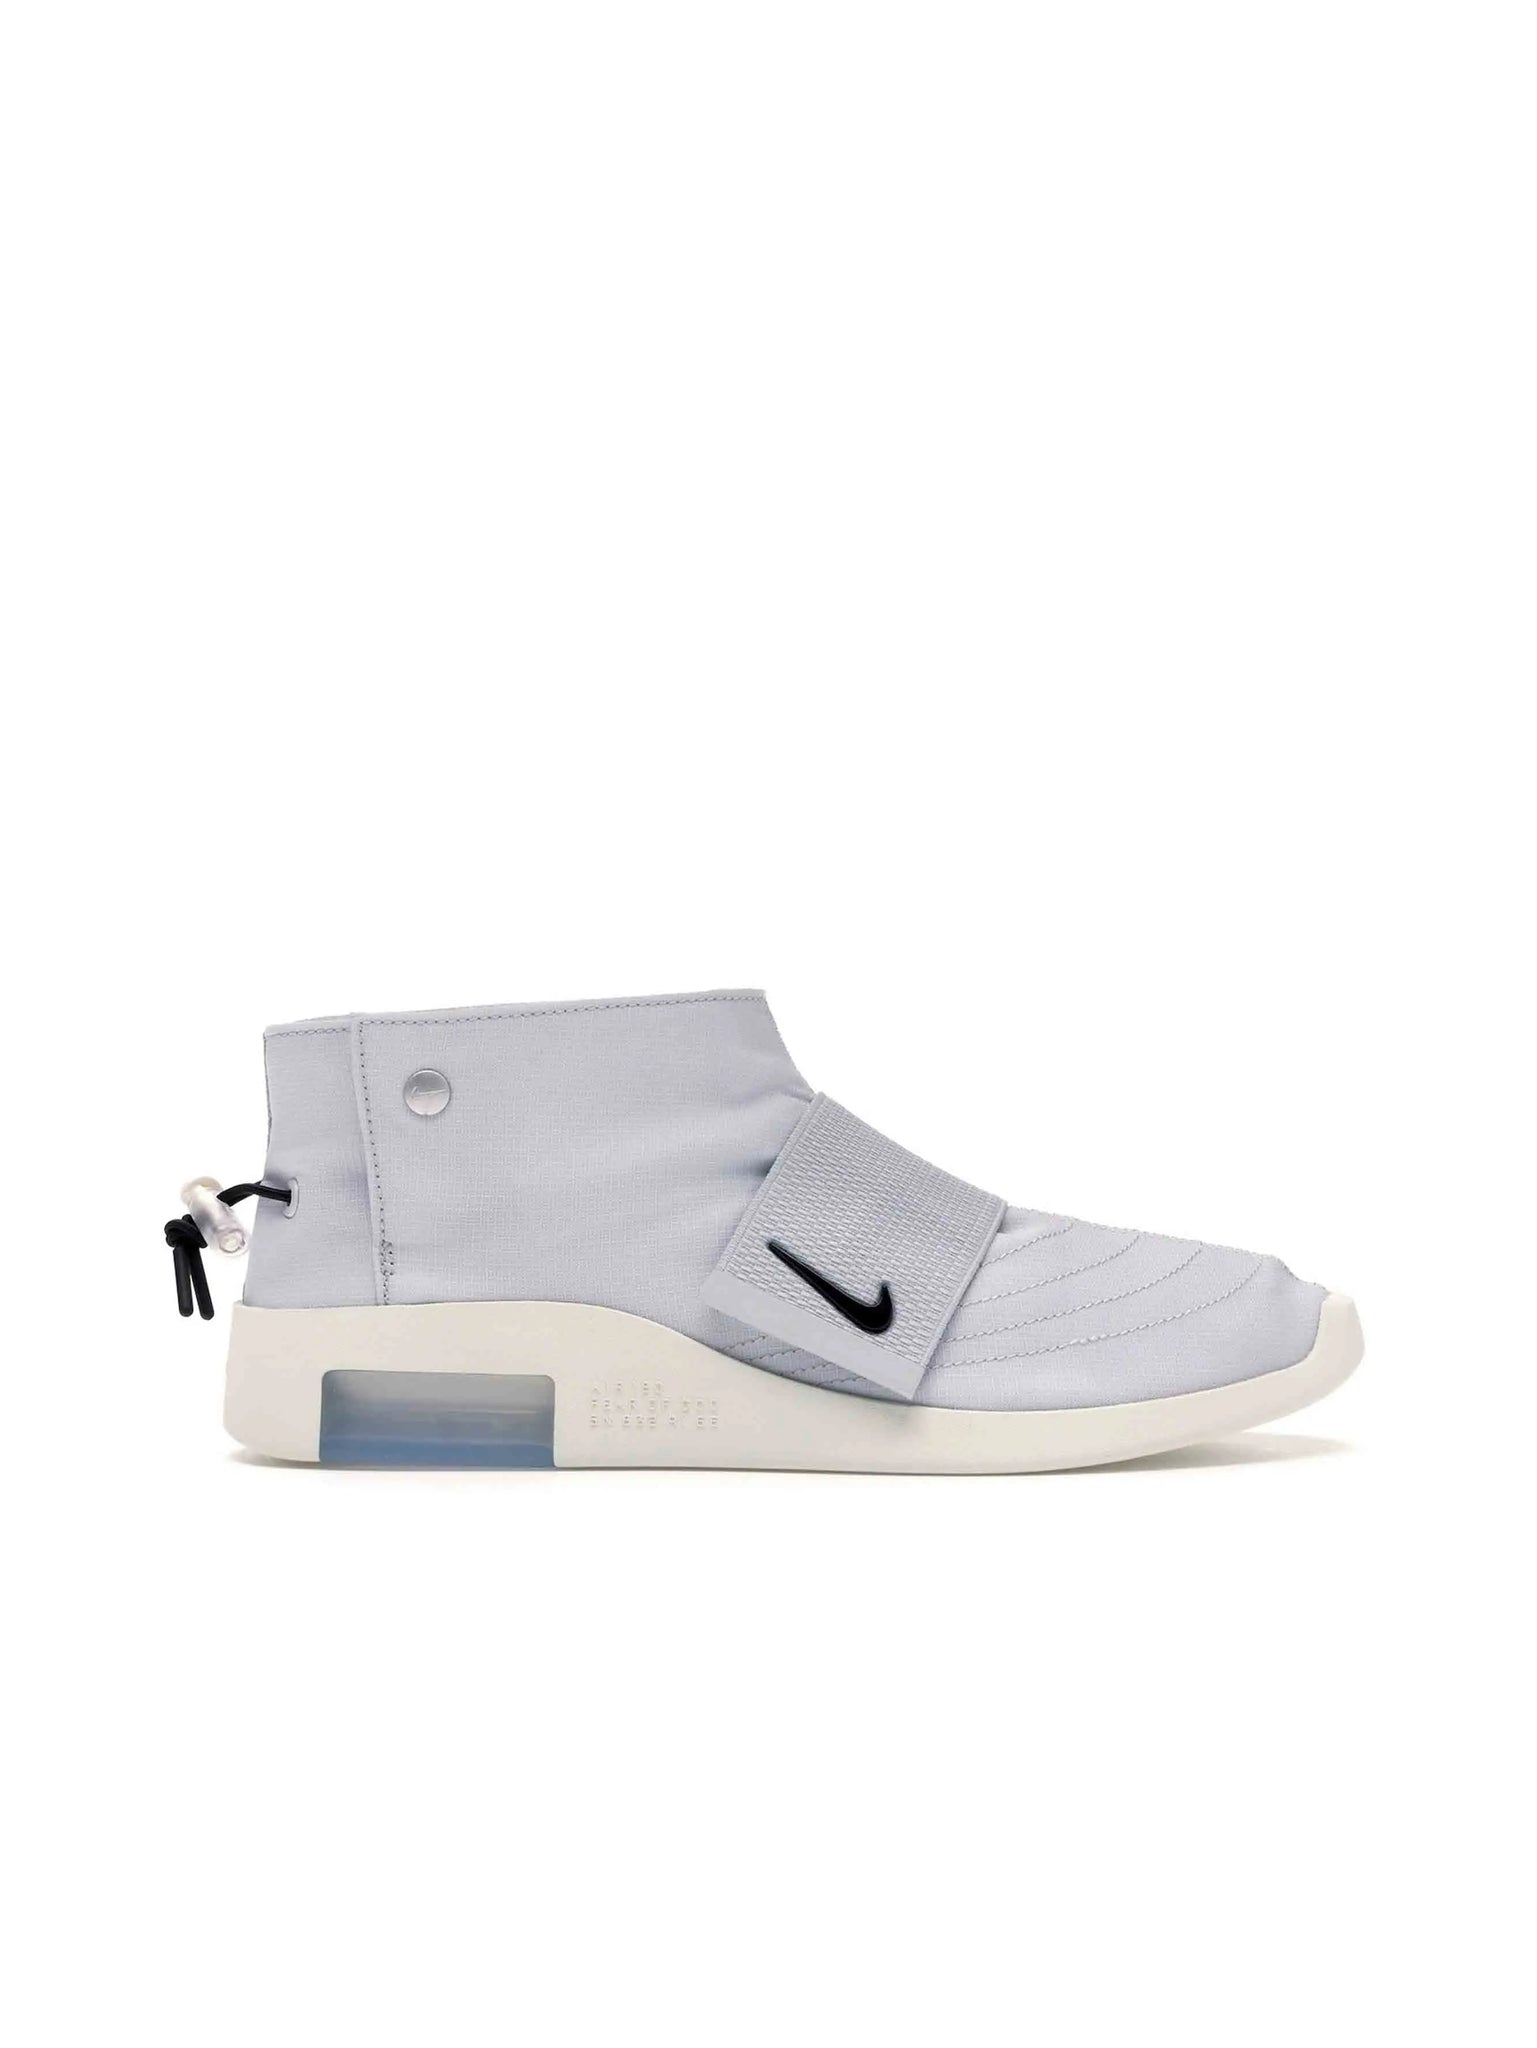 Nike Air Fear Of God Moccasin Pure Platinum in Auckland, New Zealand - Shop name